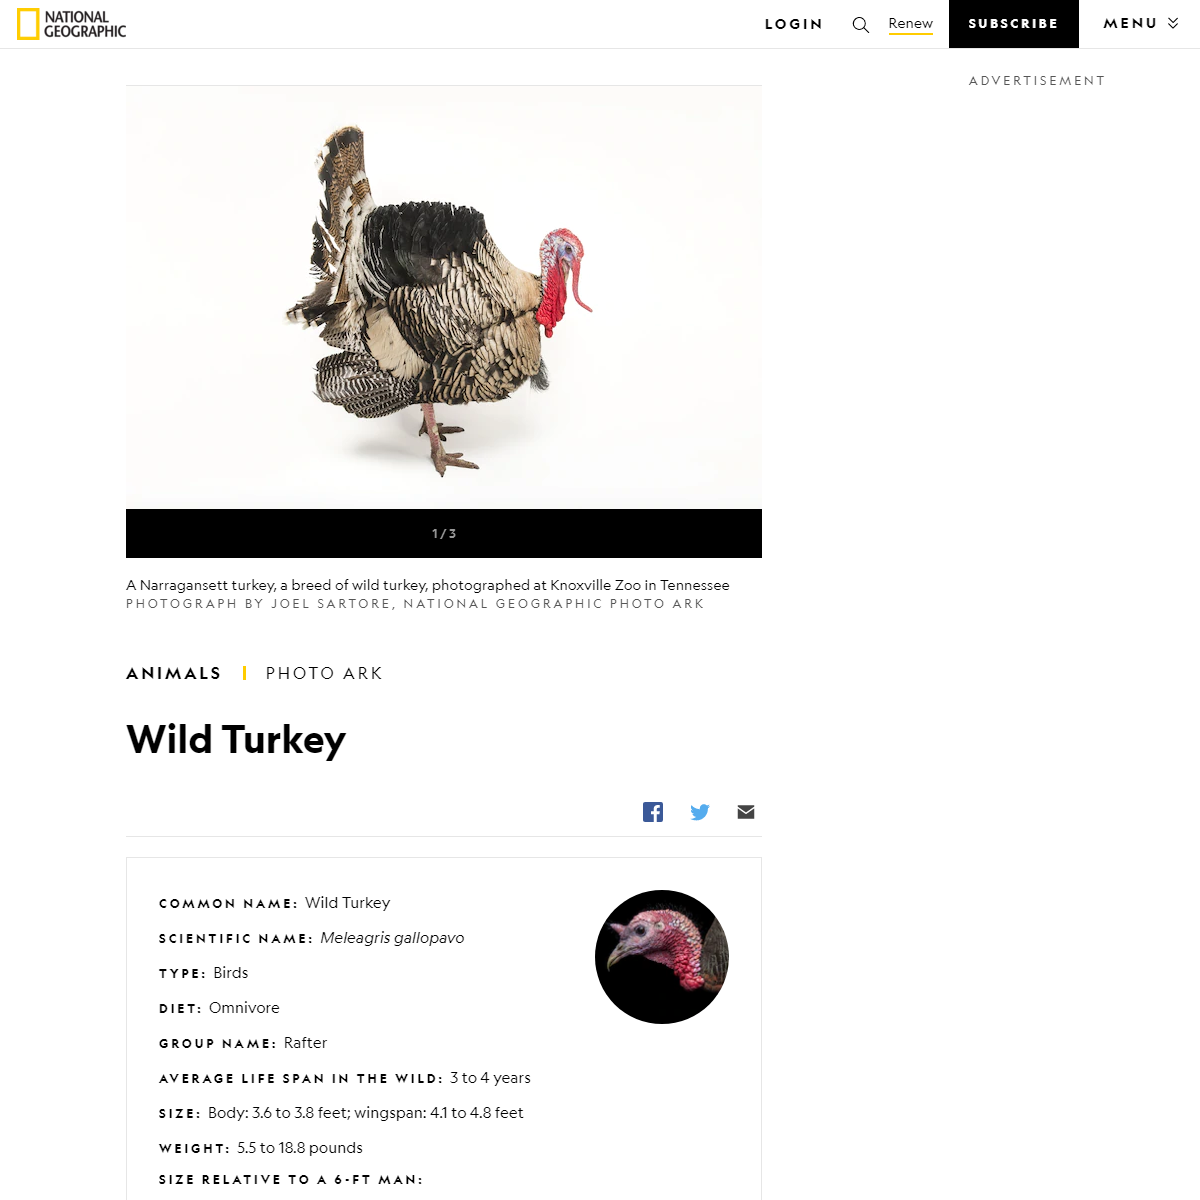 A complete backup of https://www.nationalgeographic.com/animals/birds/facts/wild-turkey